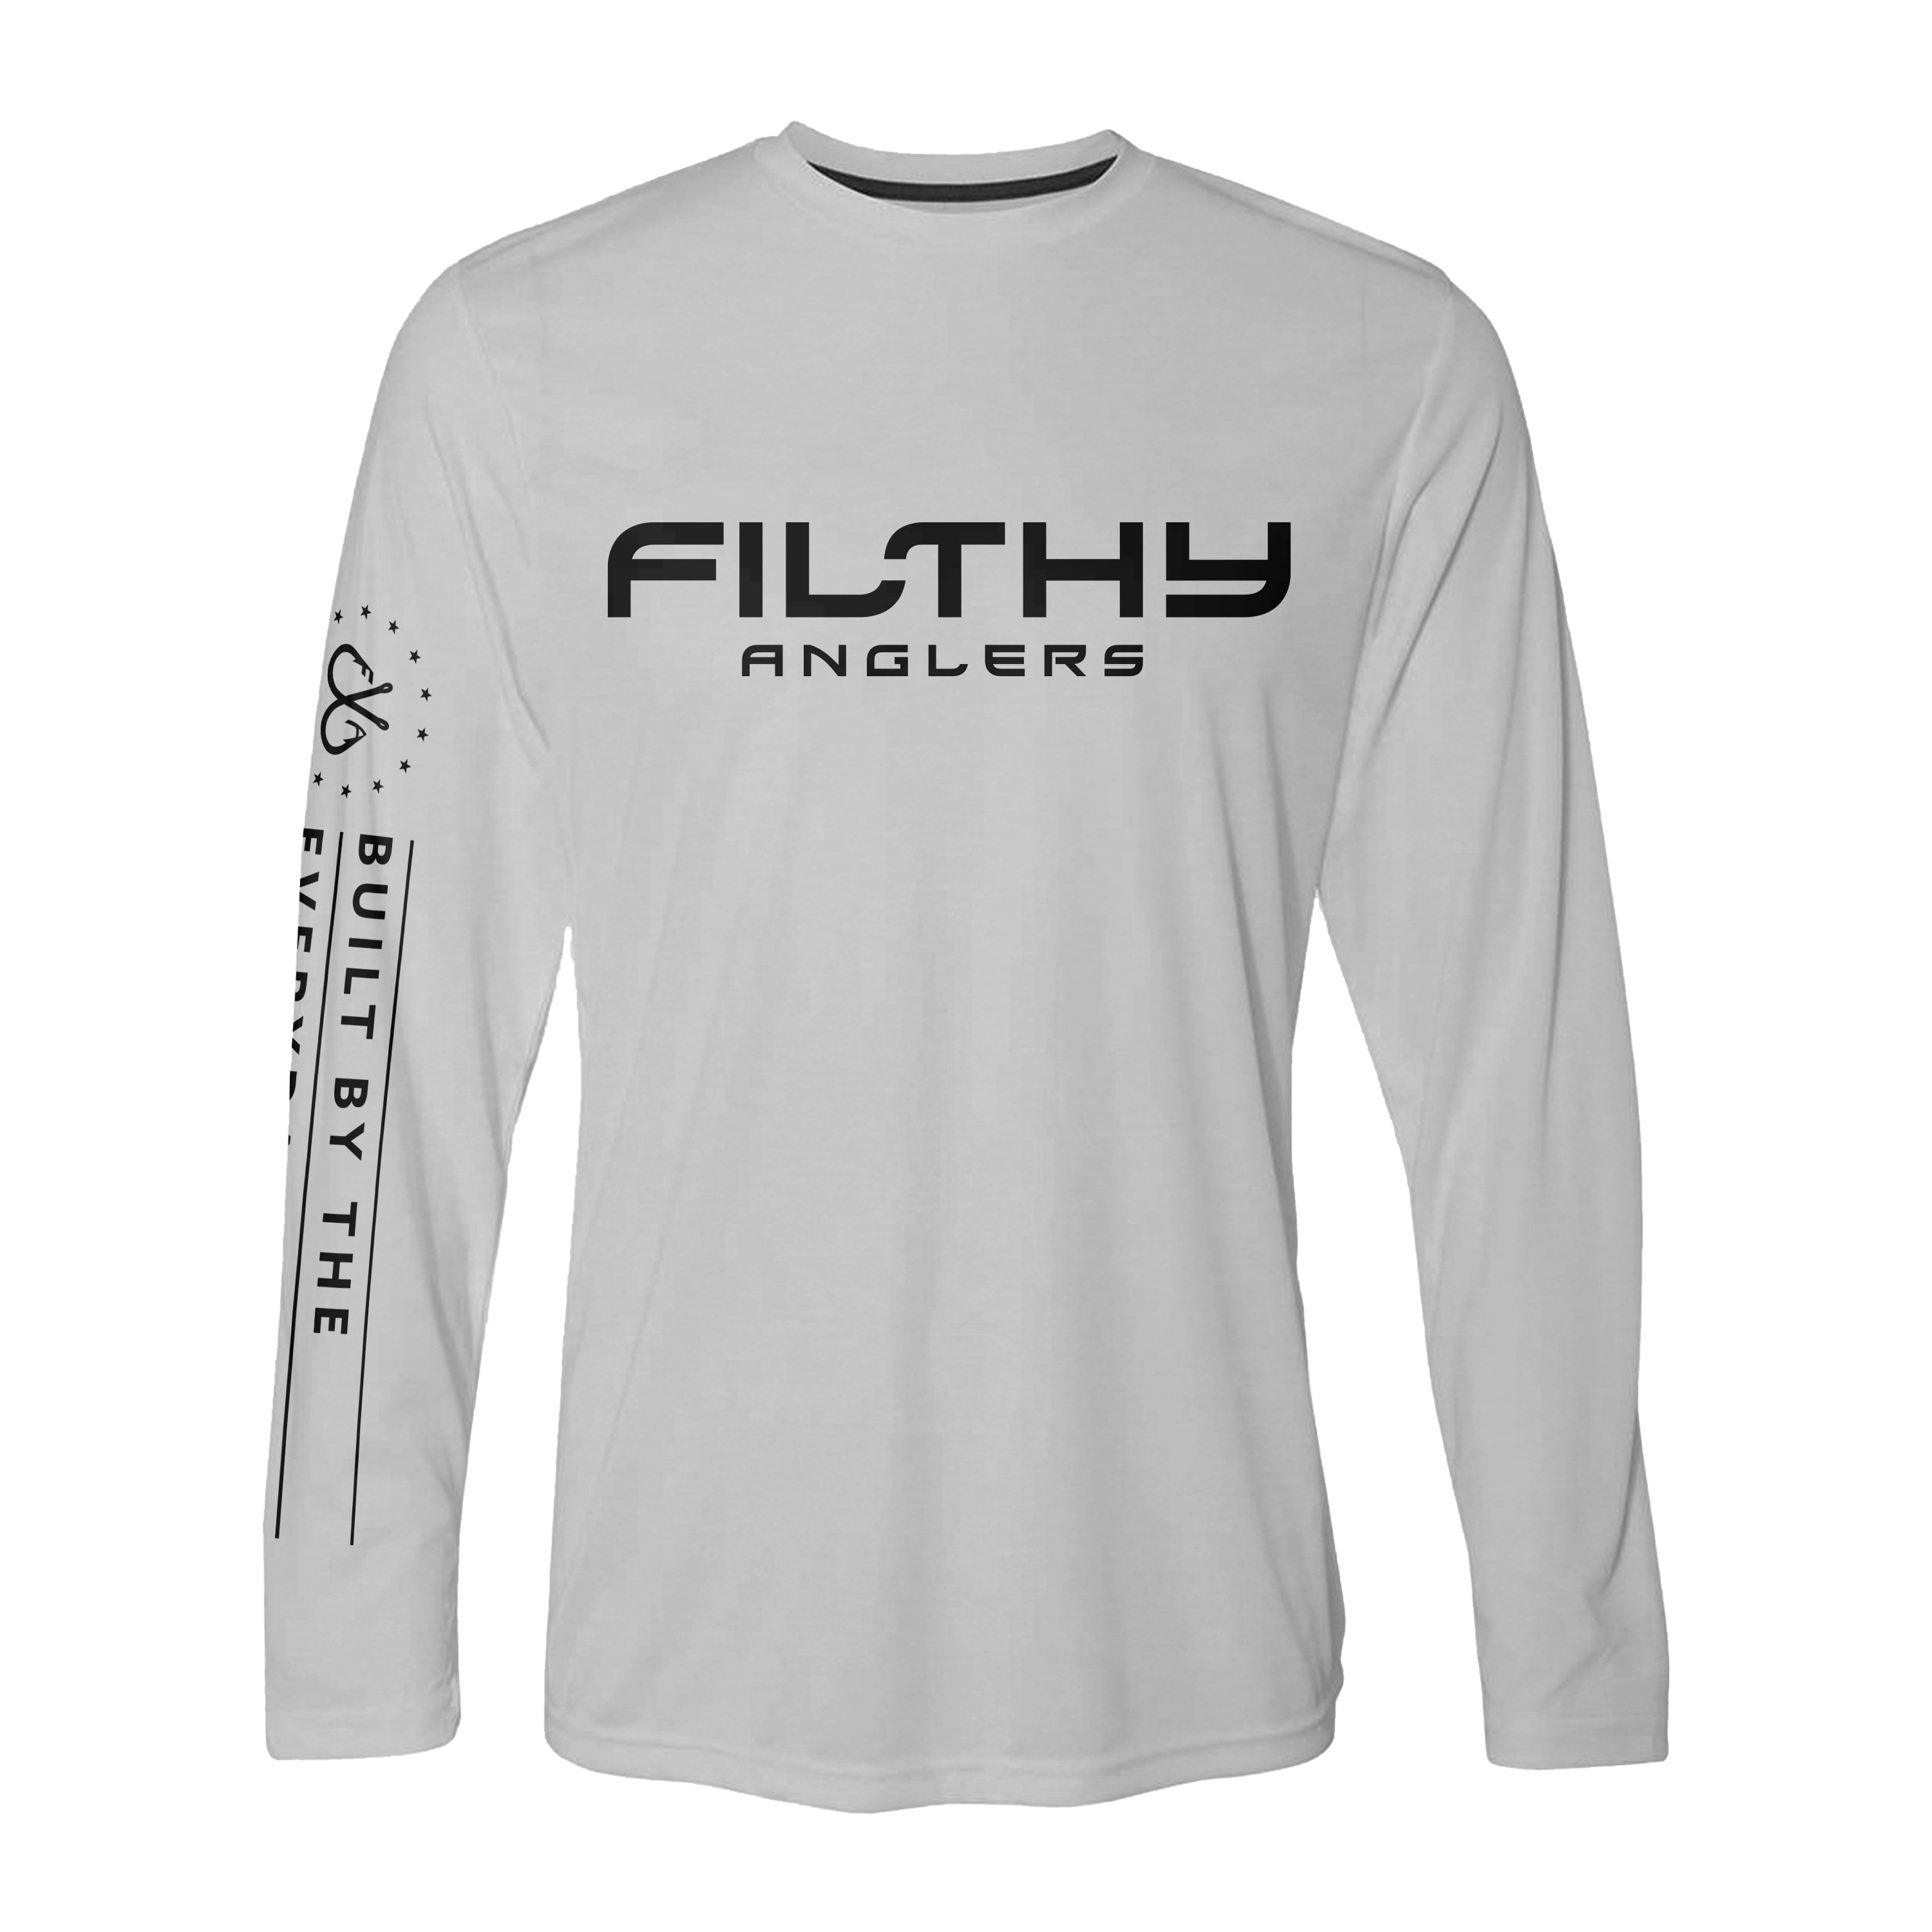 Sun Protection Lightweight Quick Dry Filthy Anglers Fishing Shirt Long Sleeve UPF 50